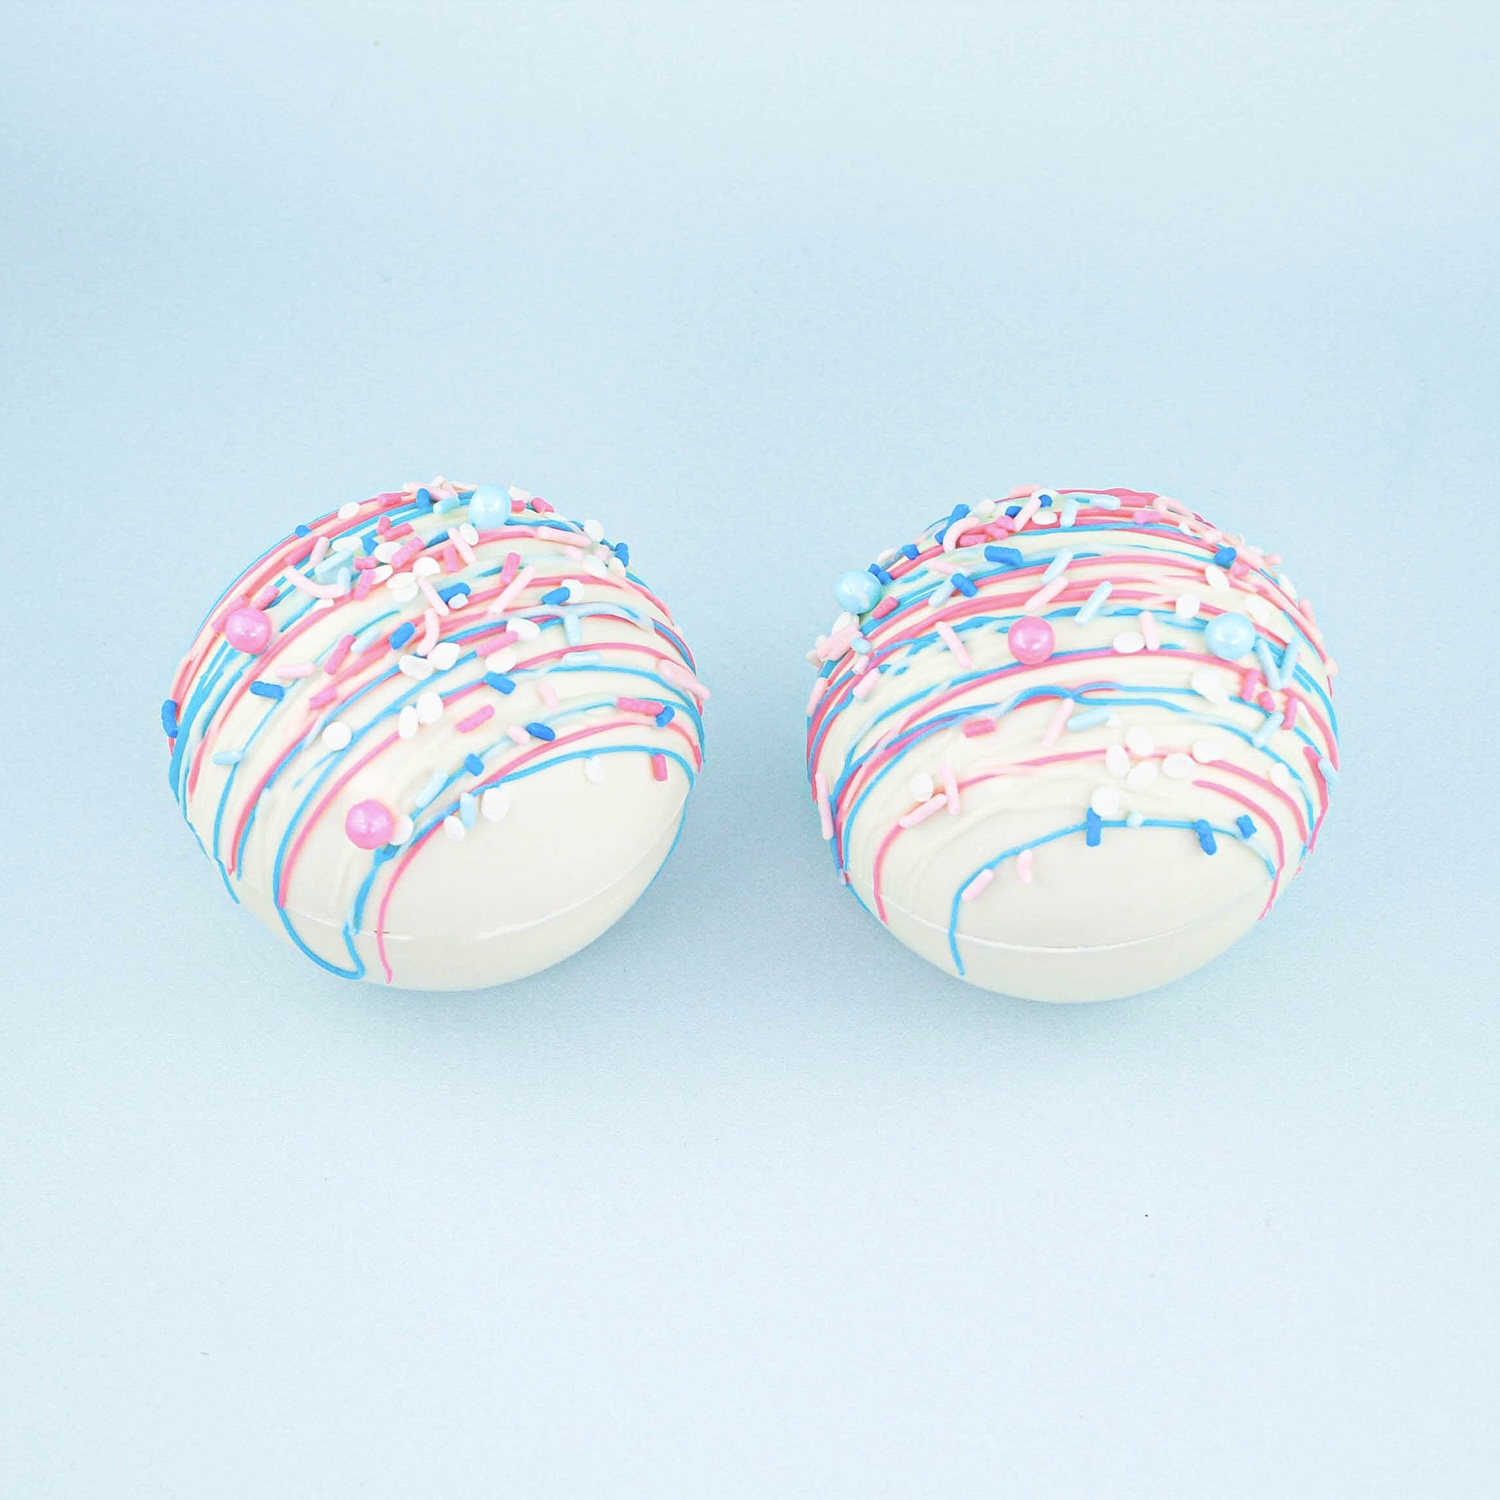 two completed white hot chocolate bombs with blue and pink accents for gender reveal